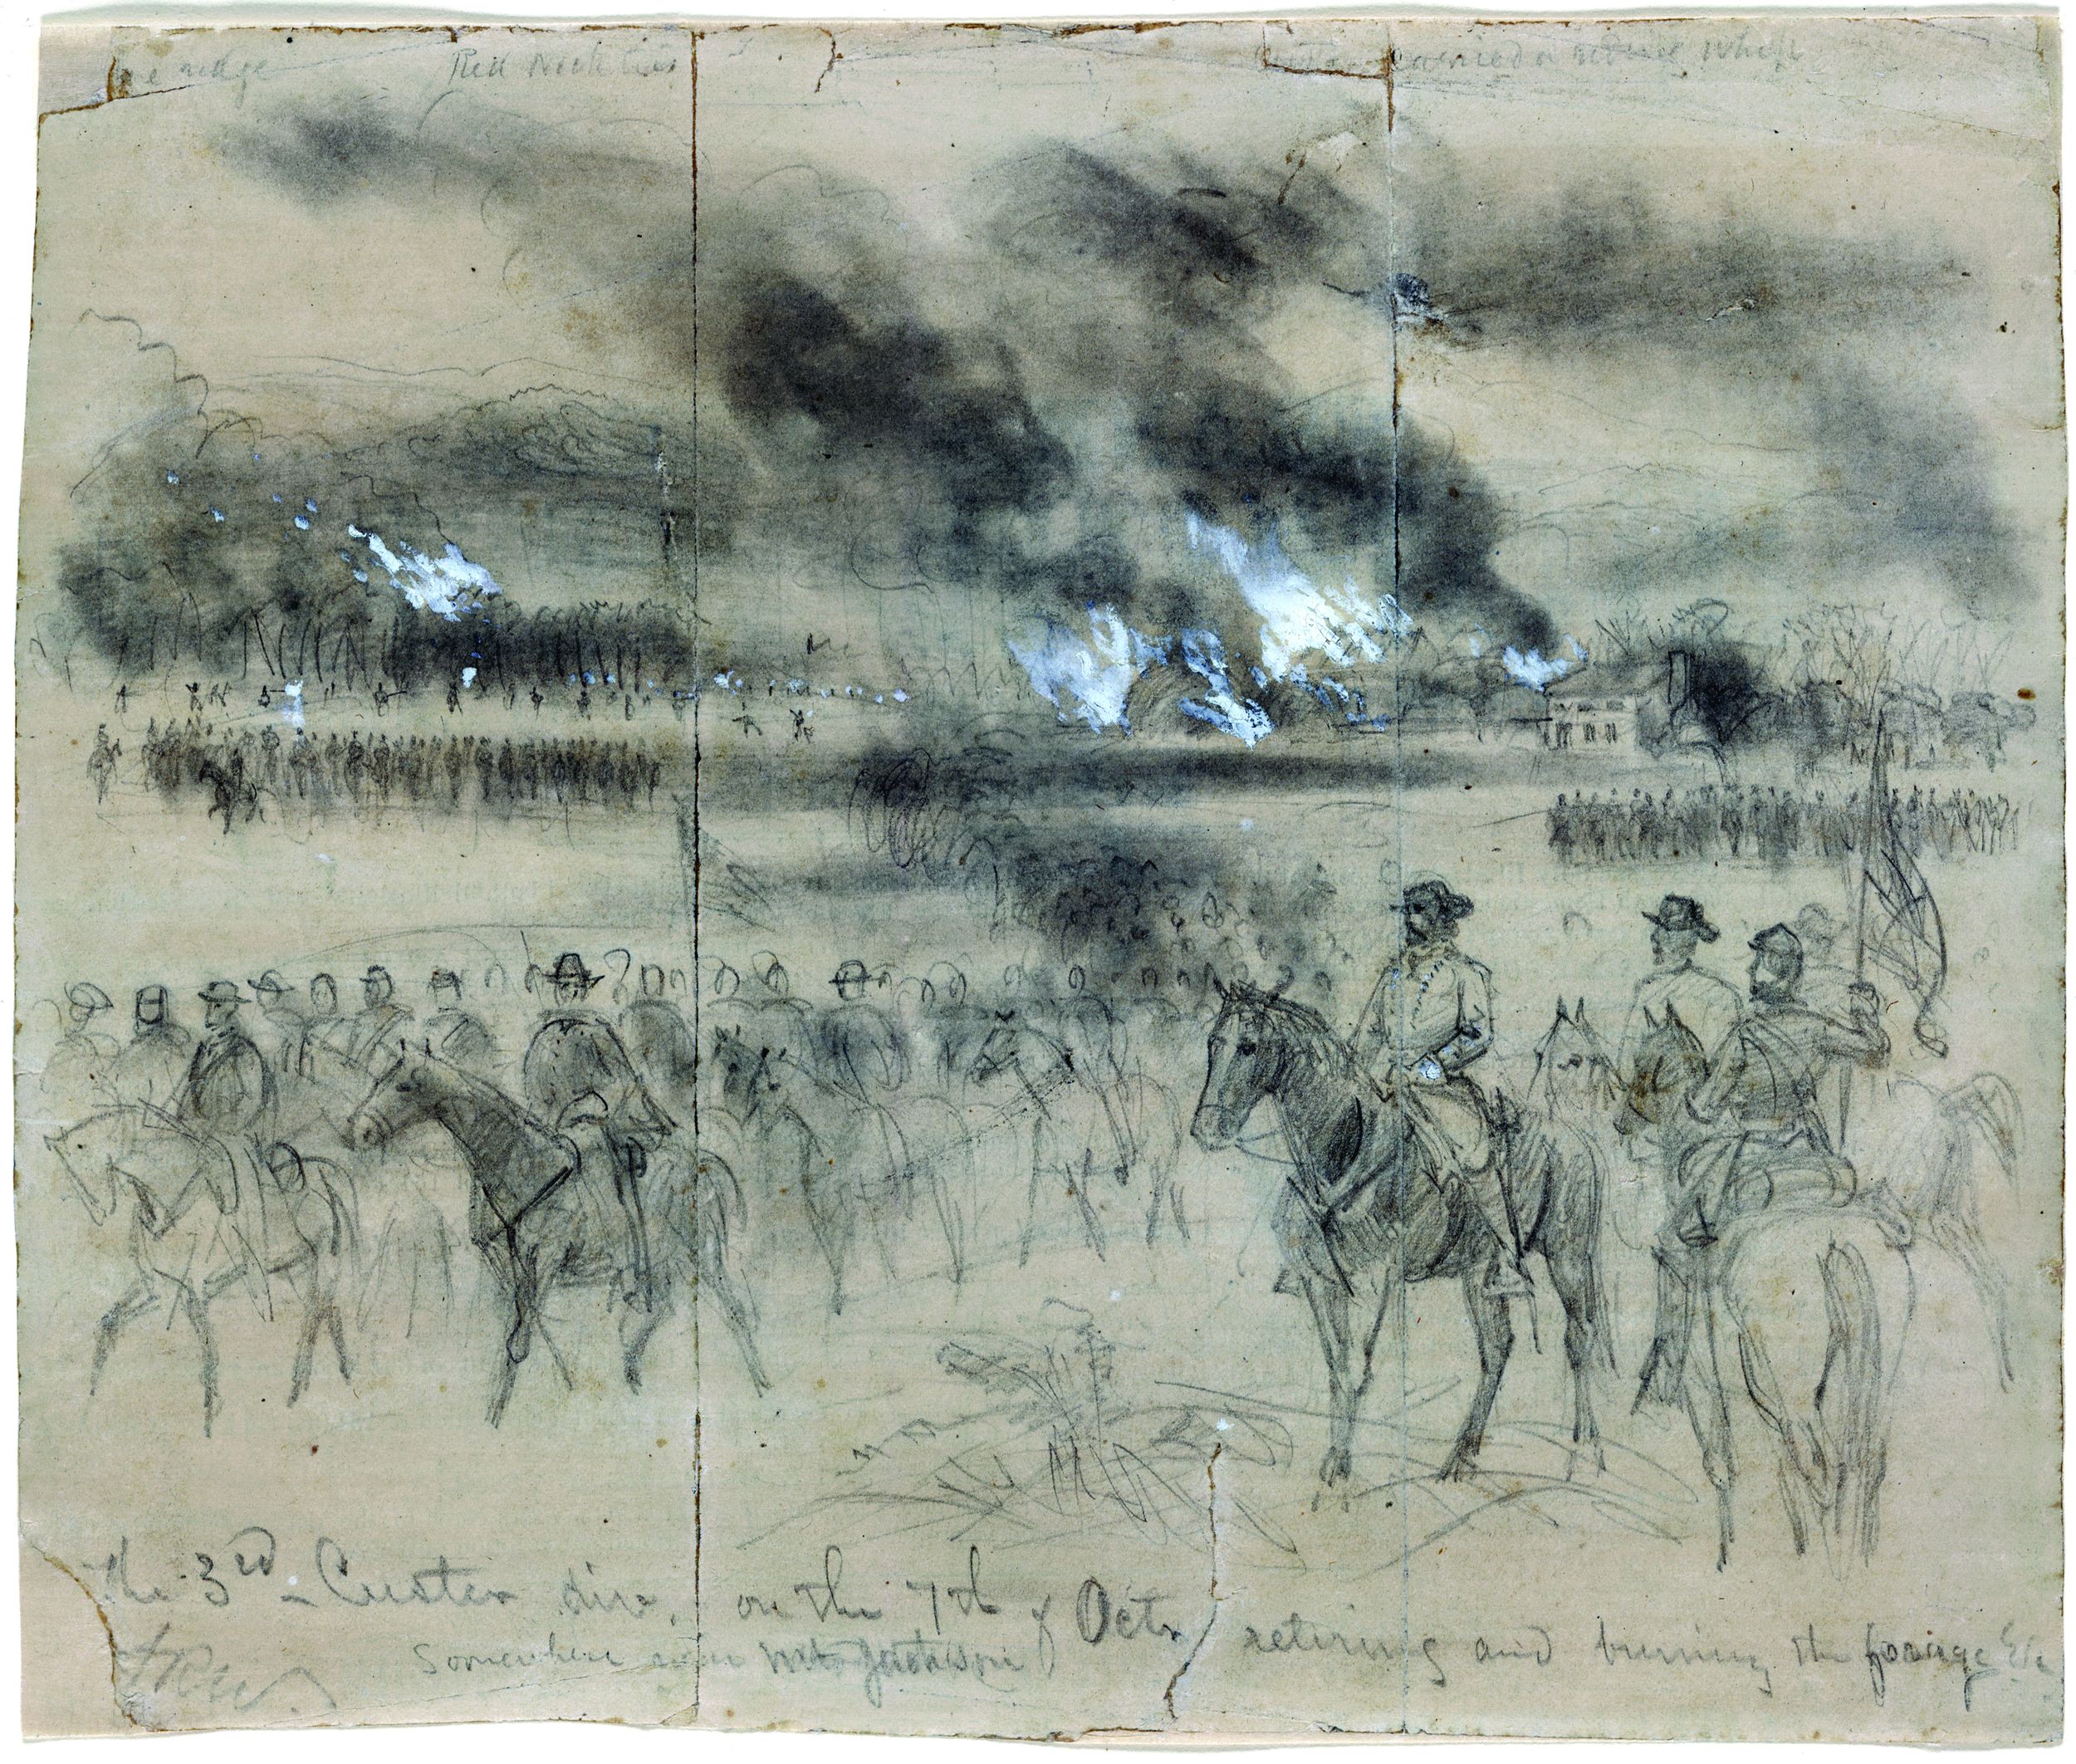 Brigadier General George Armstrong Custer and his cavalry lead two regiments of Union infantry in the field.